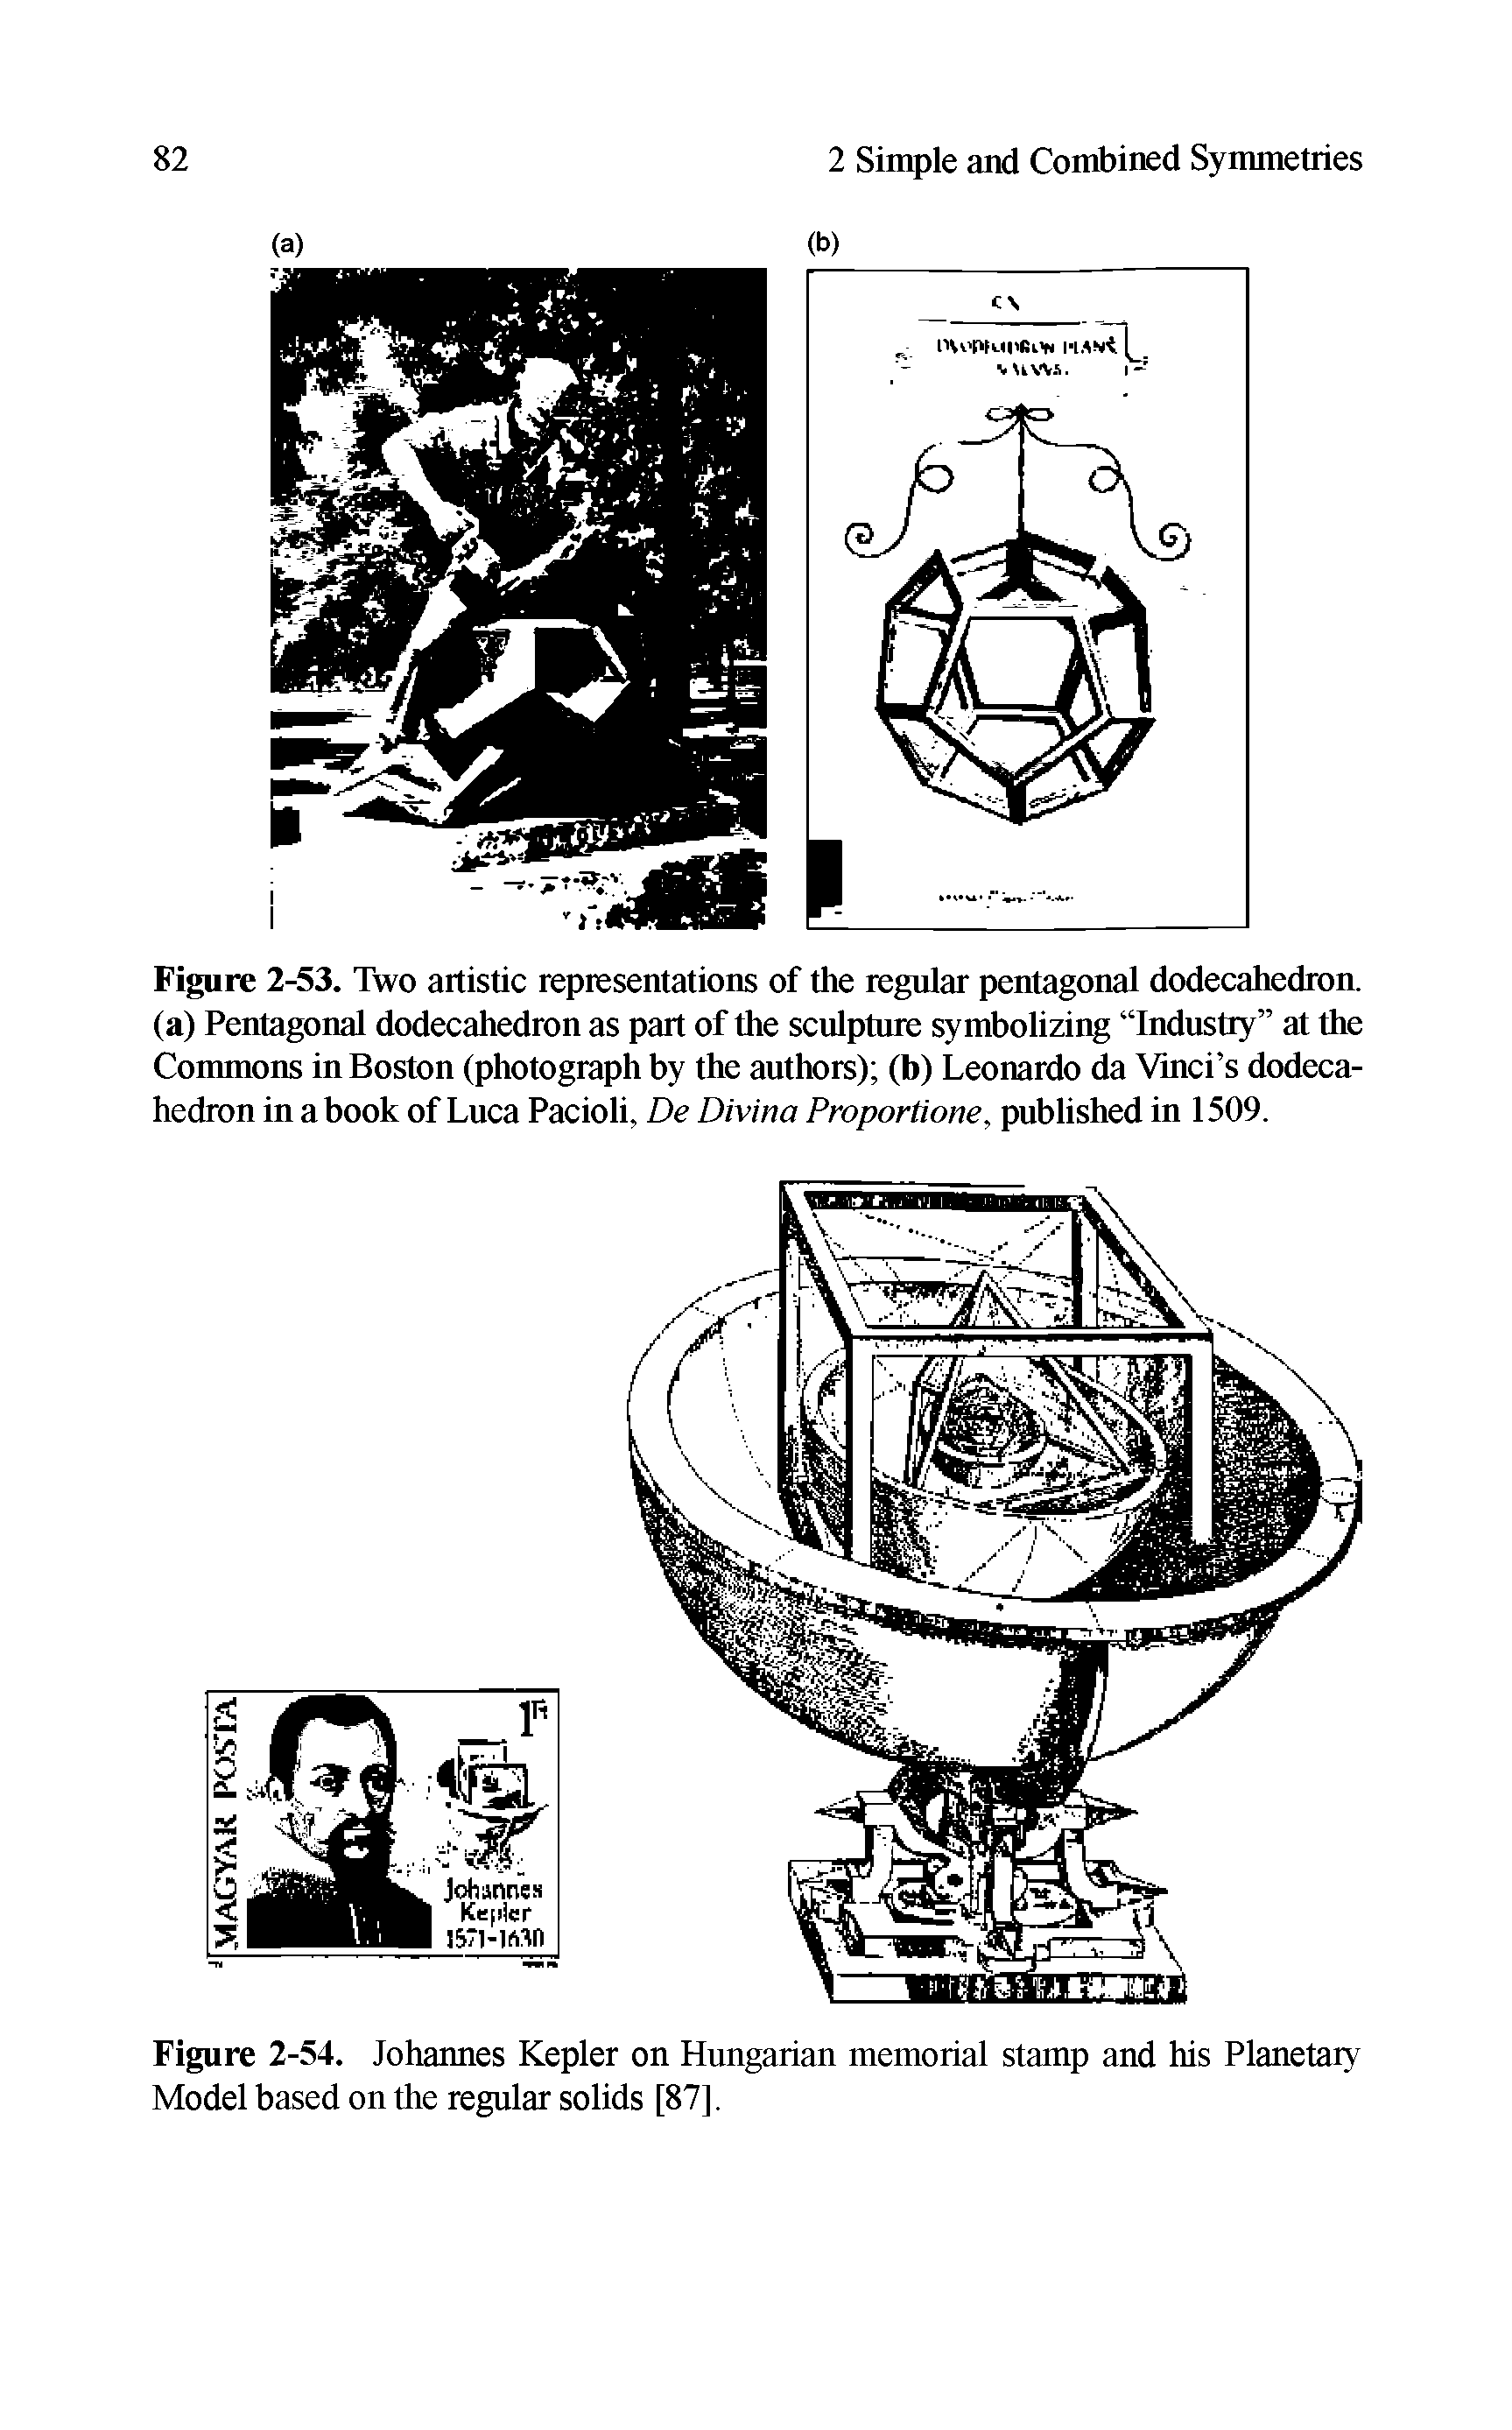 Figure 2-54. Johannes Kepler on Hungarian memorial stamp and his Planetary Model based on the regular solids [87],...